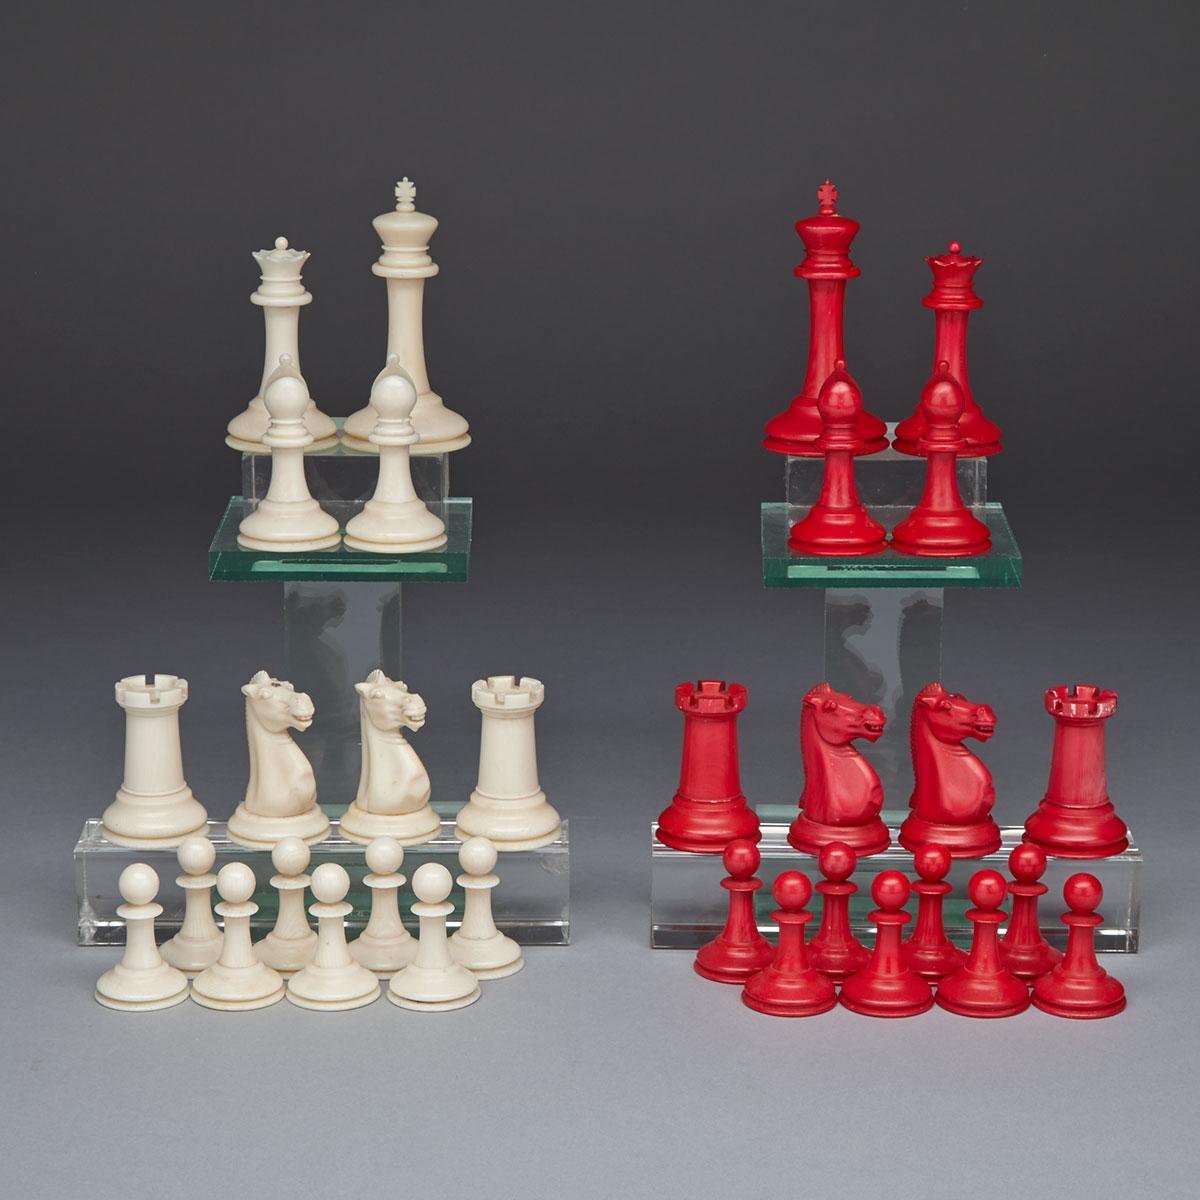 Jaques of London Turned Ivory Staunton  Pattern Chess Set, 19th/early 20th century